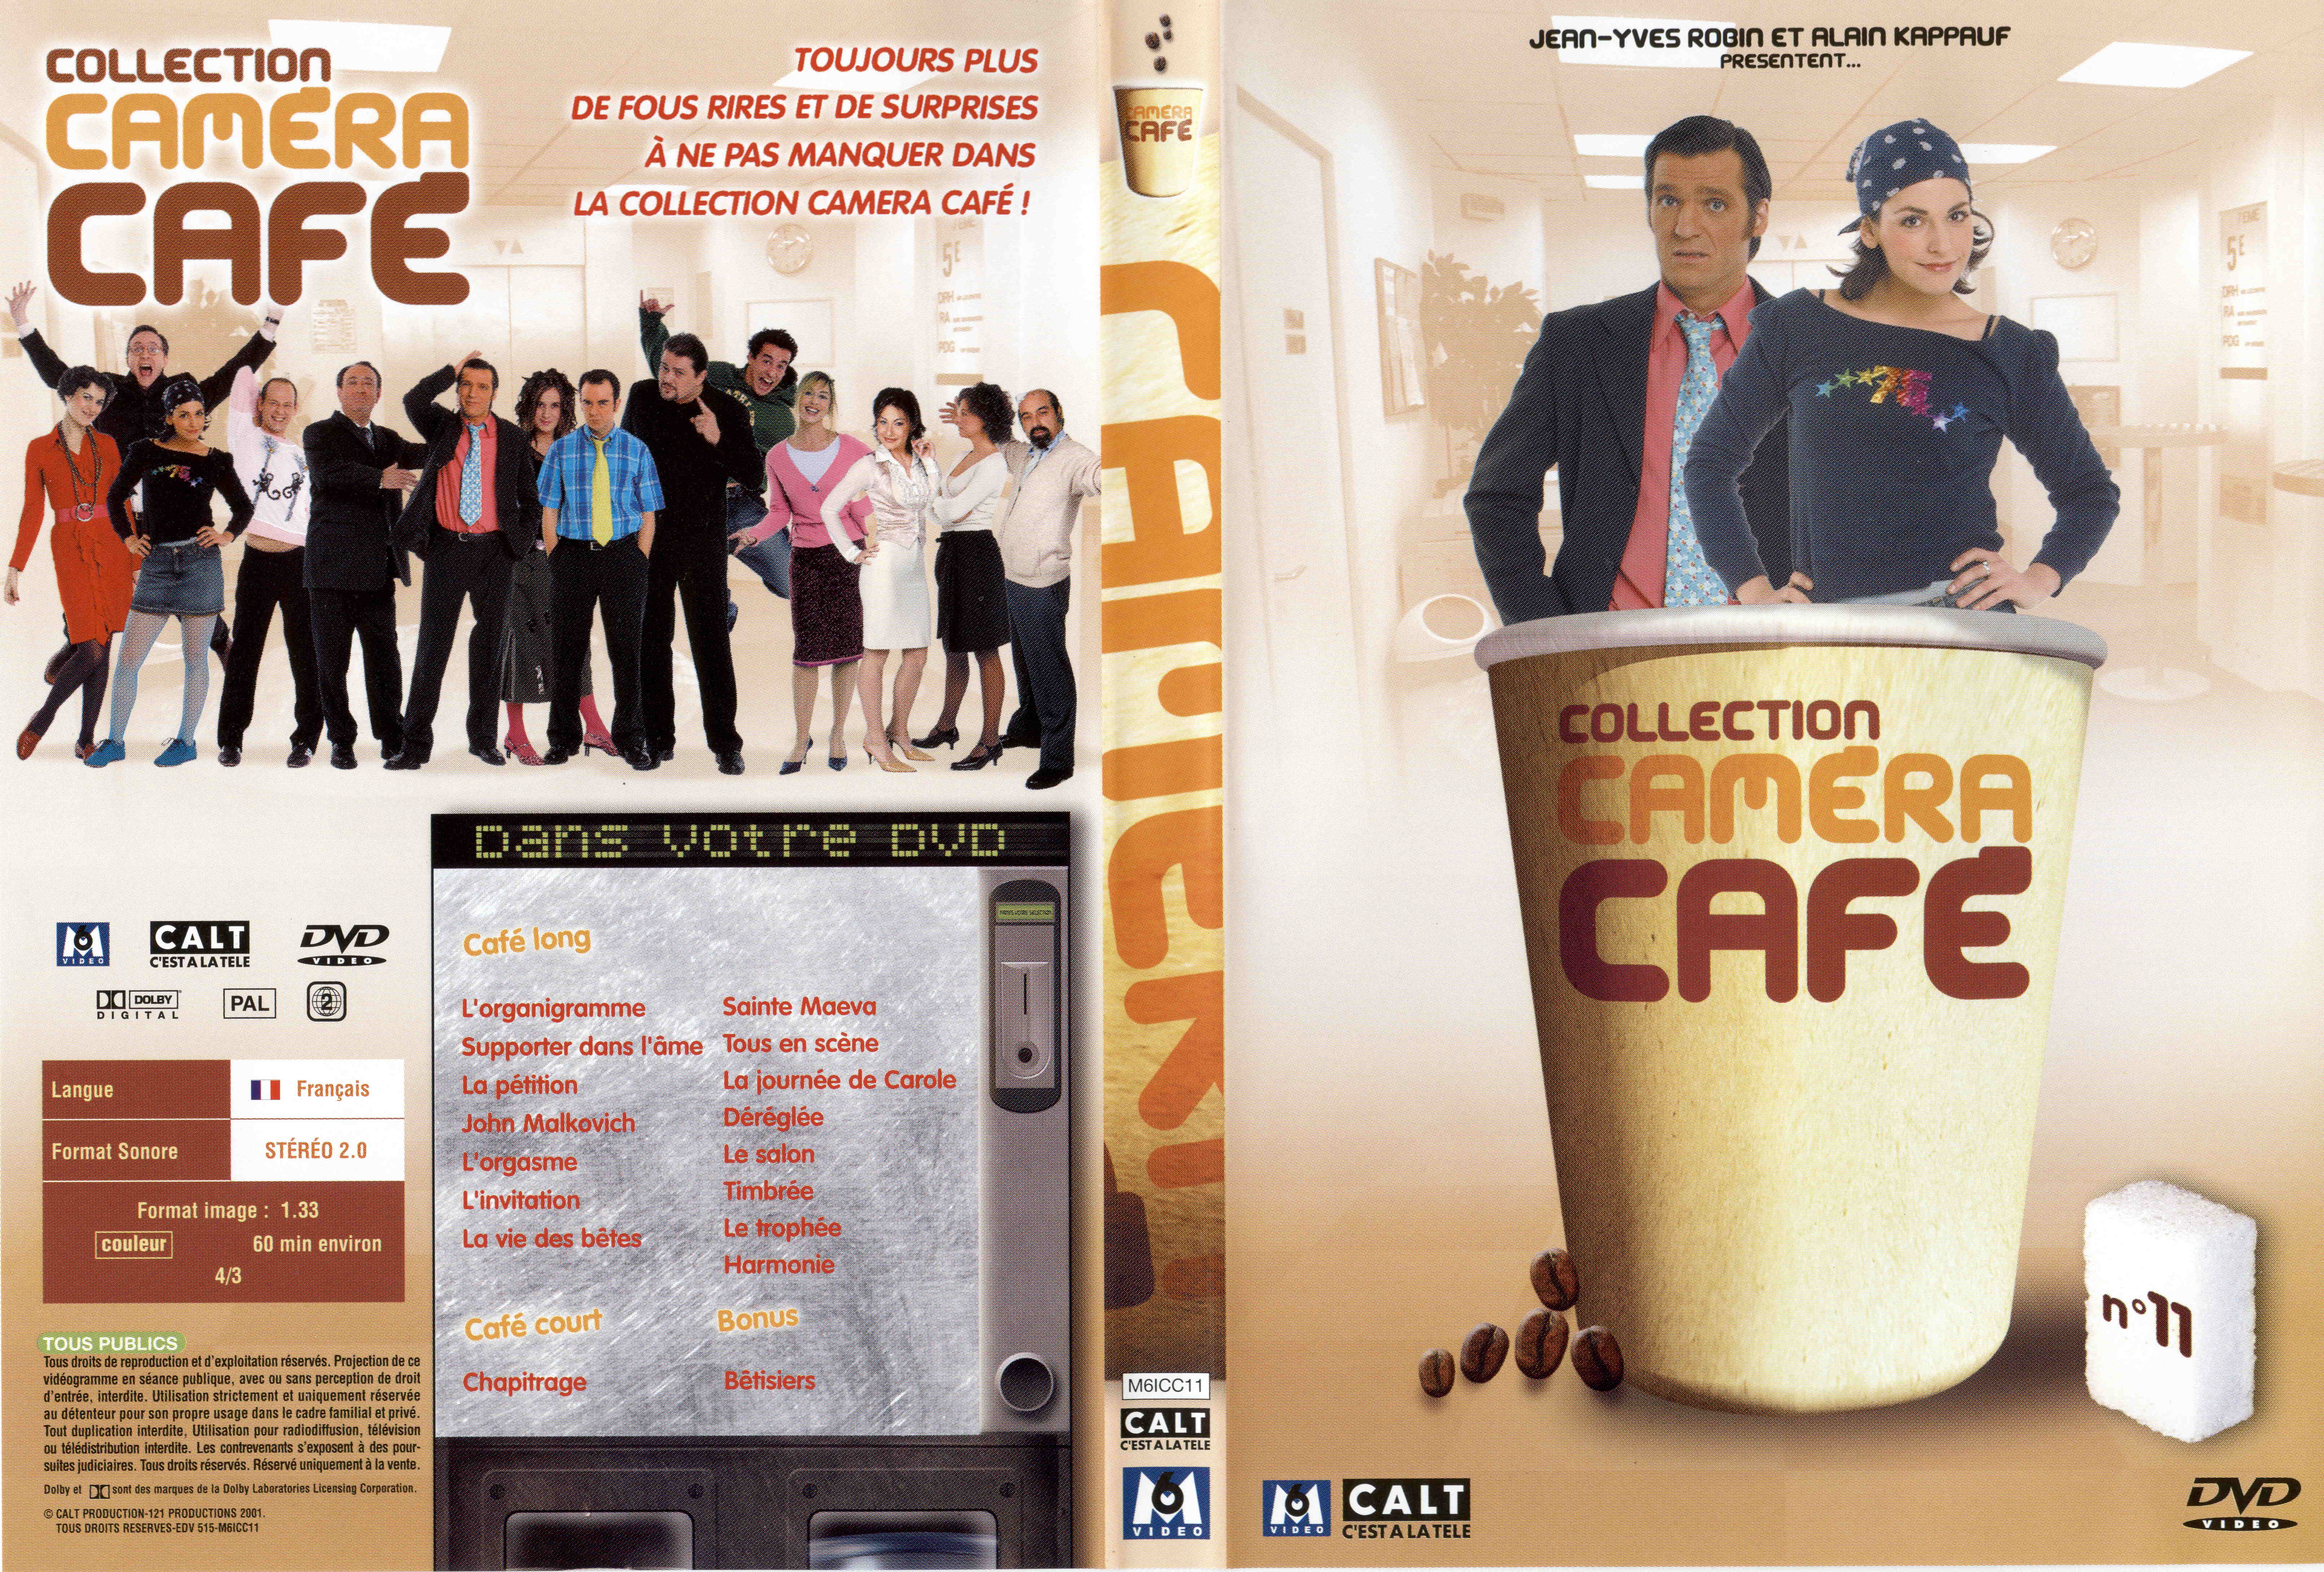 Jaquette DVD Collection Camera Cafe vol 11